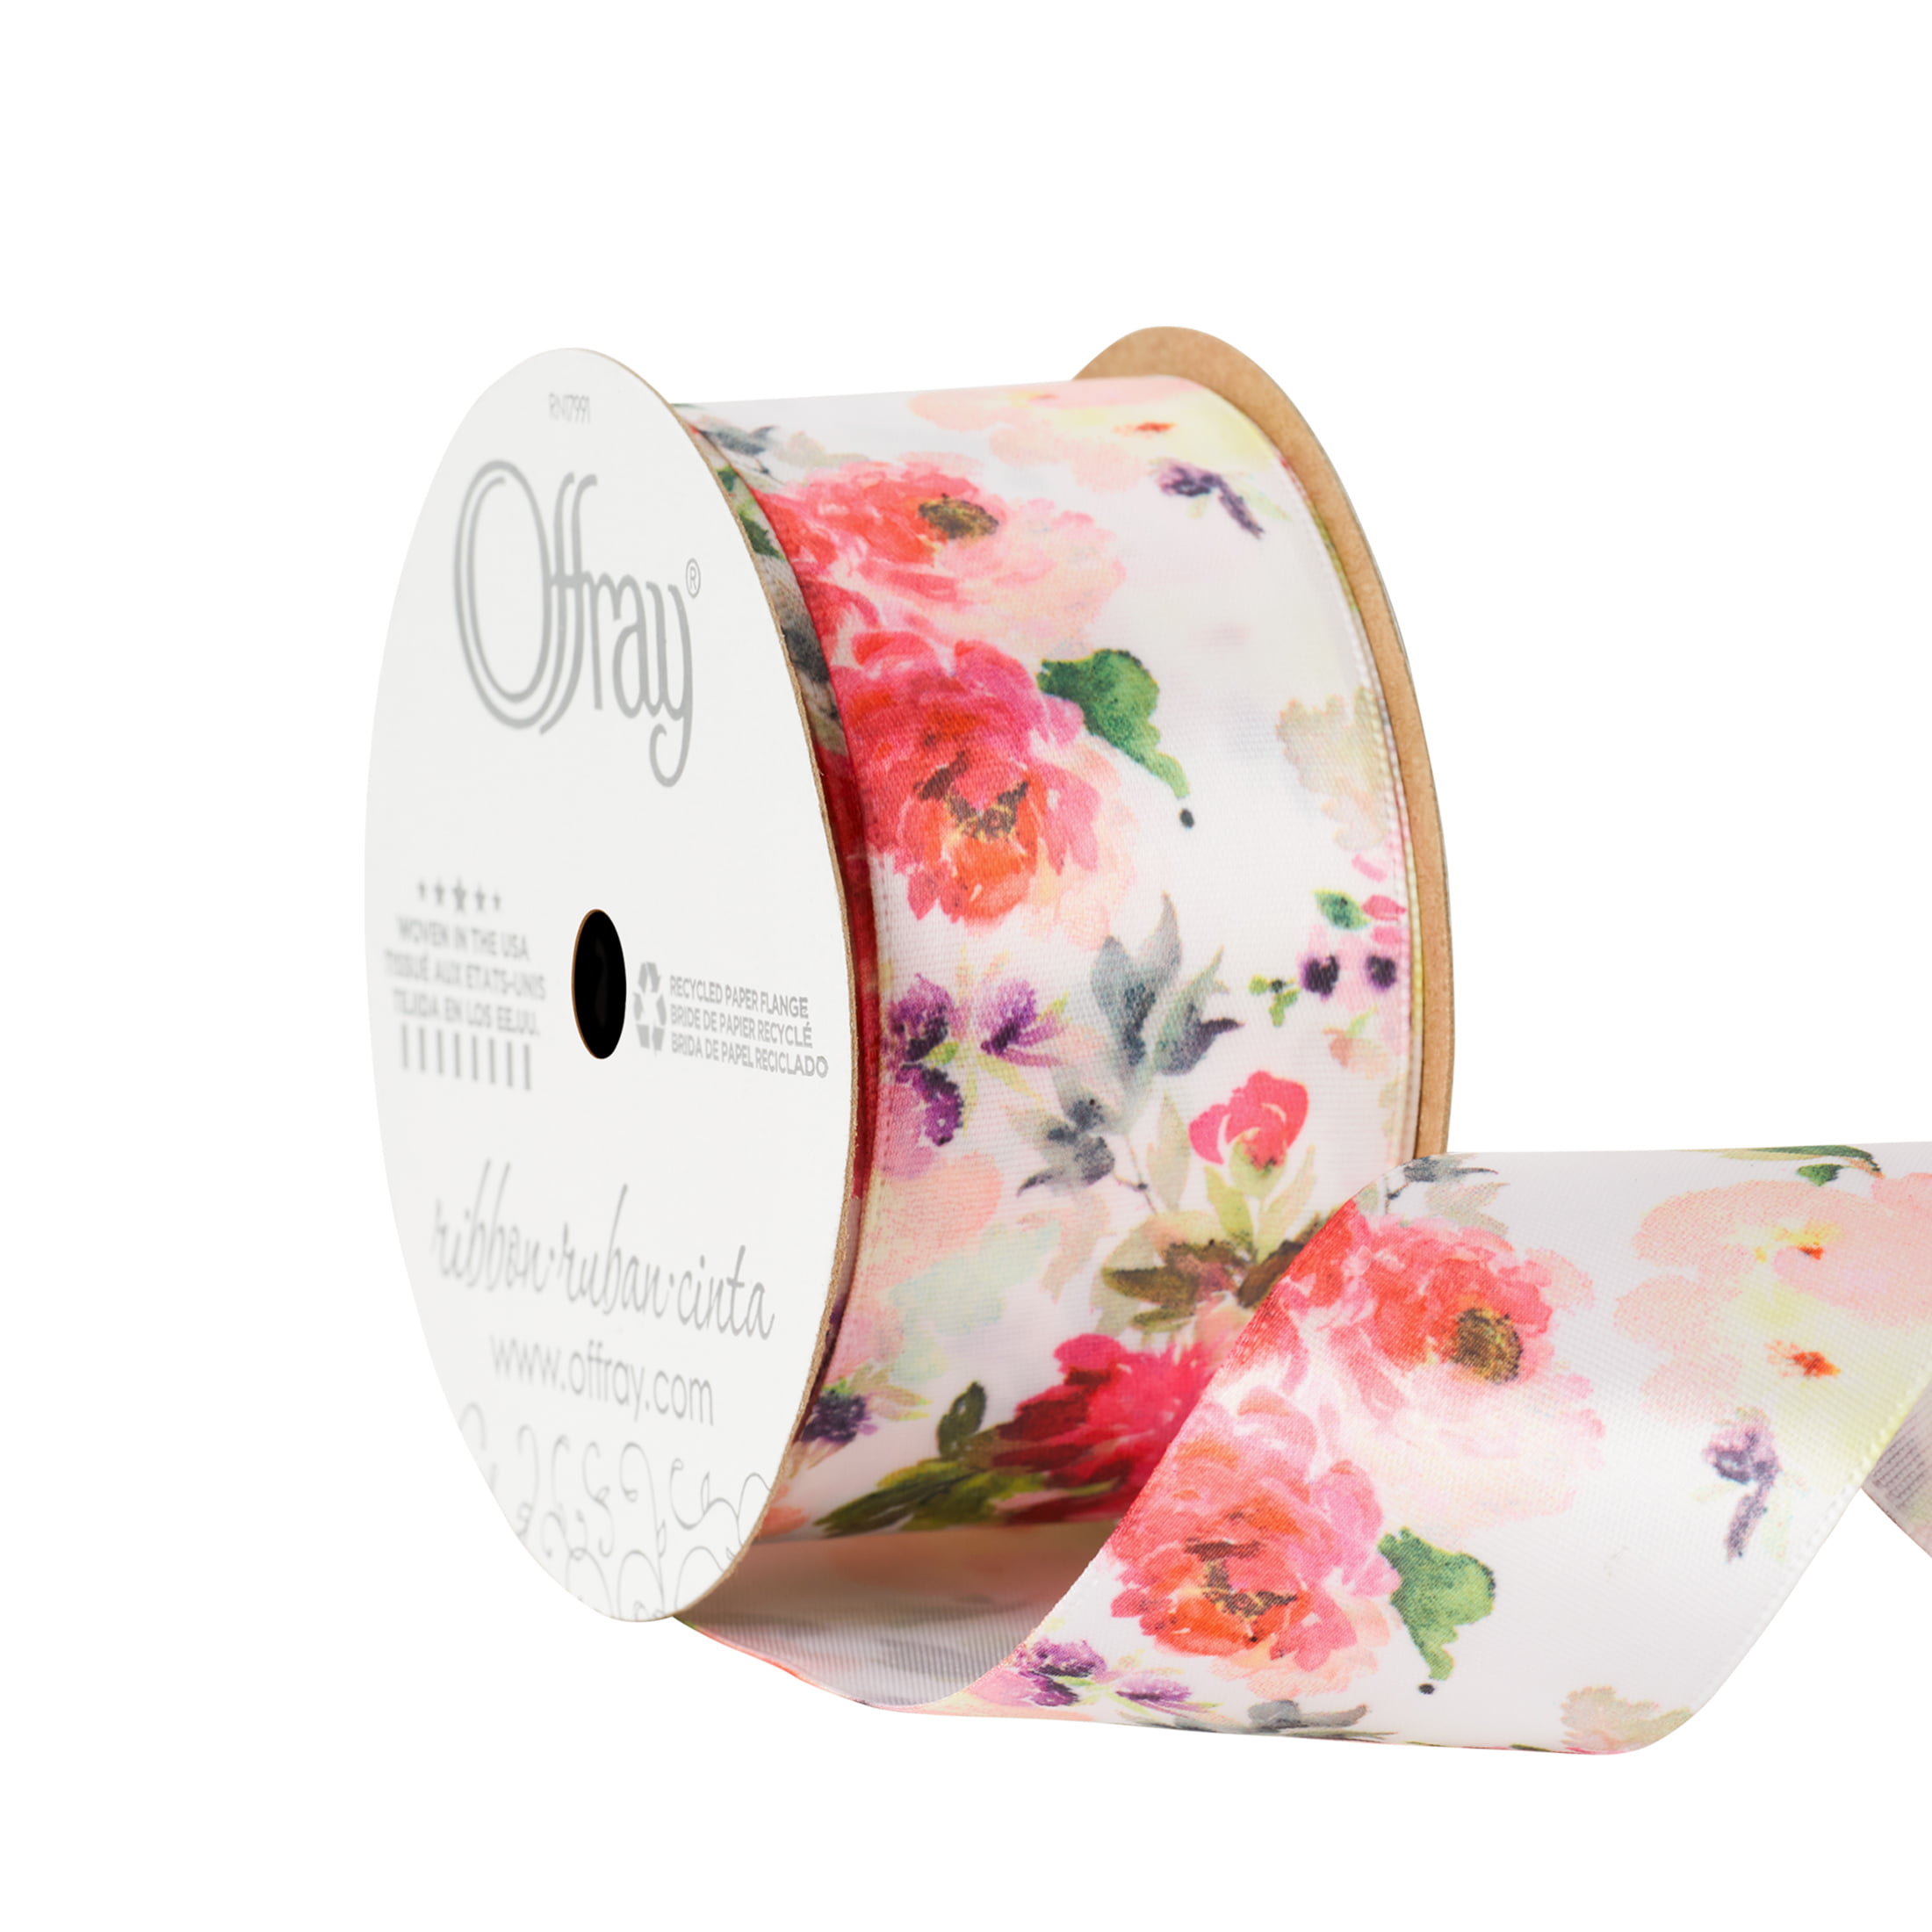 Offray Ribbon, White 1 1/2 inch Cutout Satin Ribbon for Sewing, Crafts, and  Wedding, 9 feet, 1 Each - DroneUp Delivery